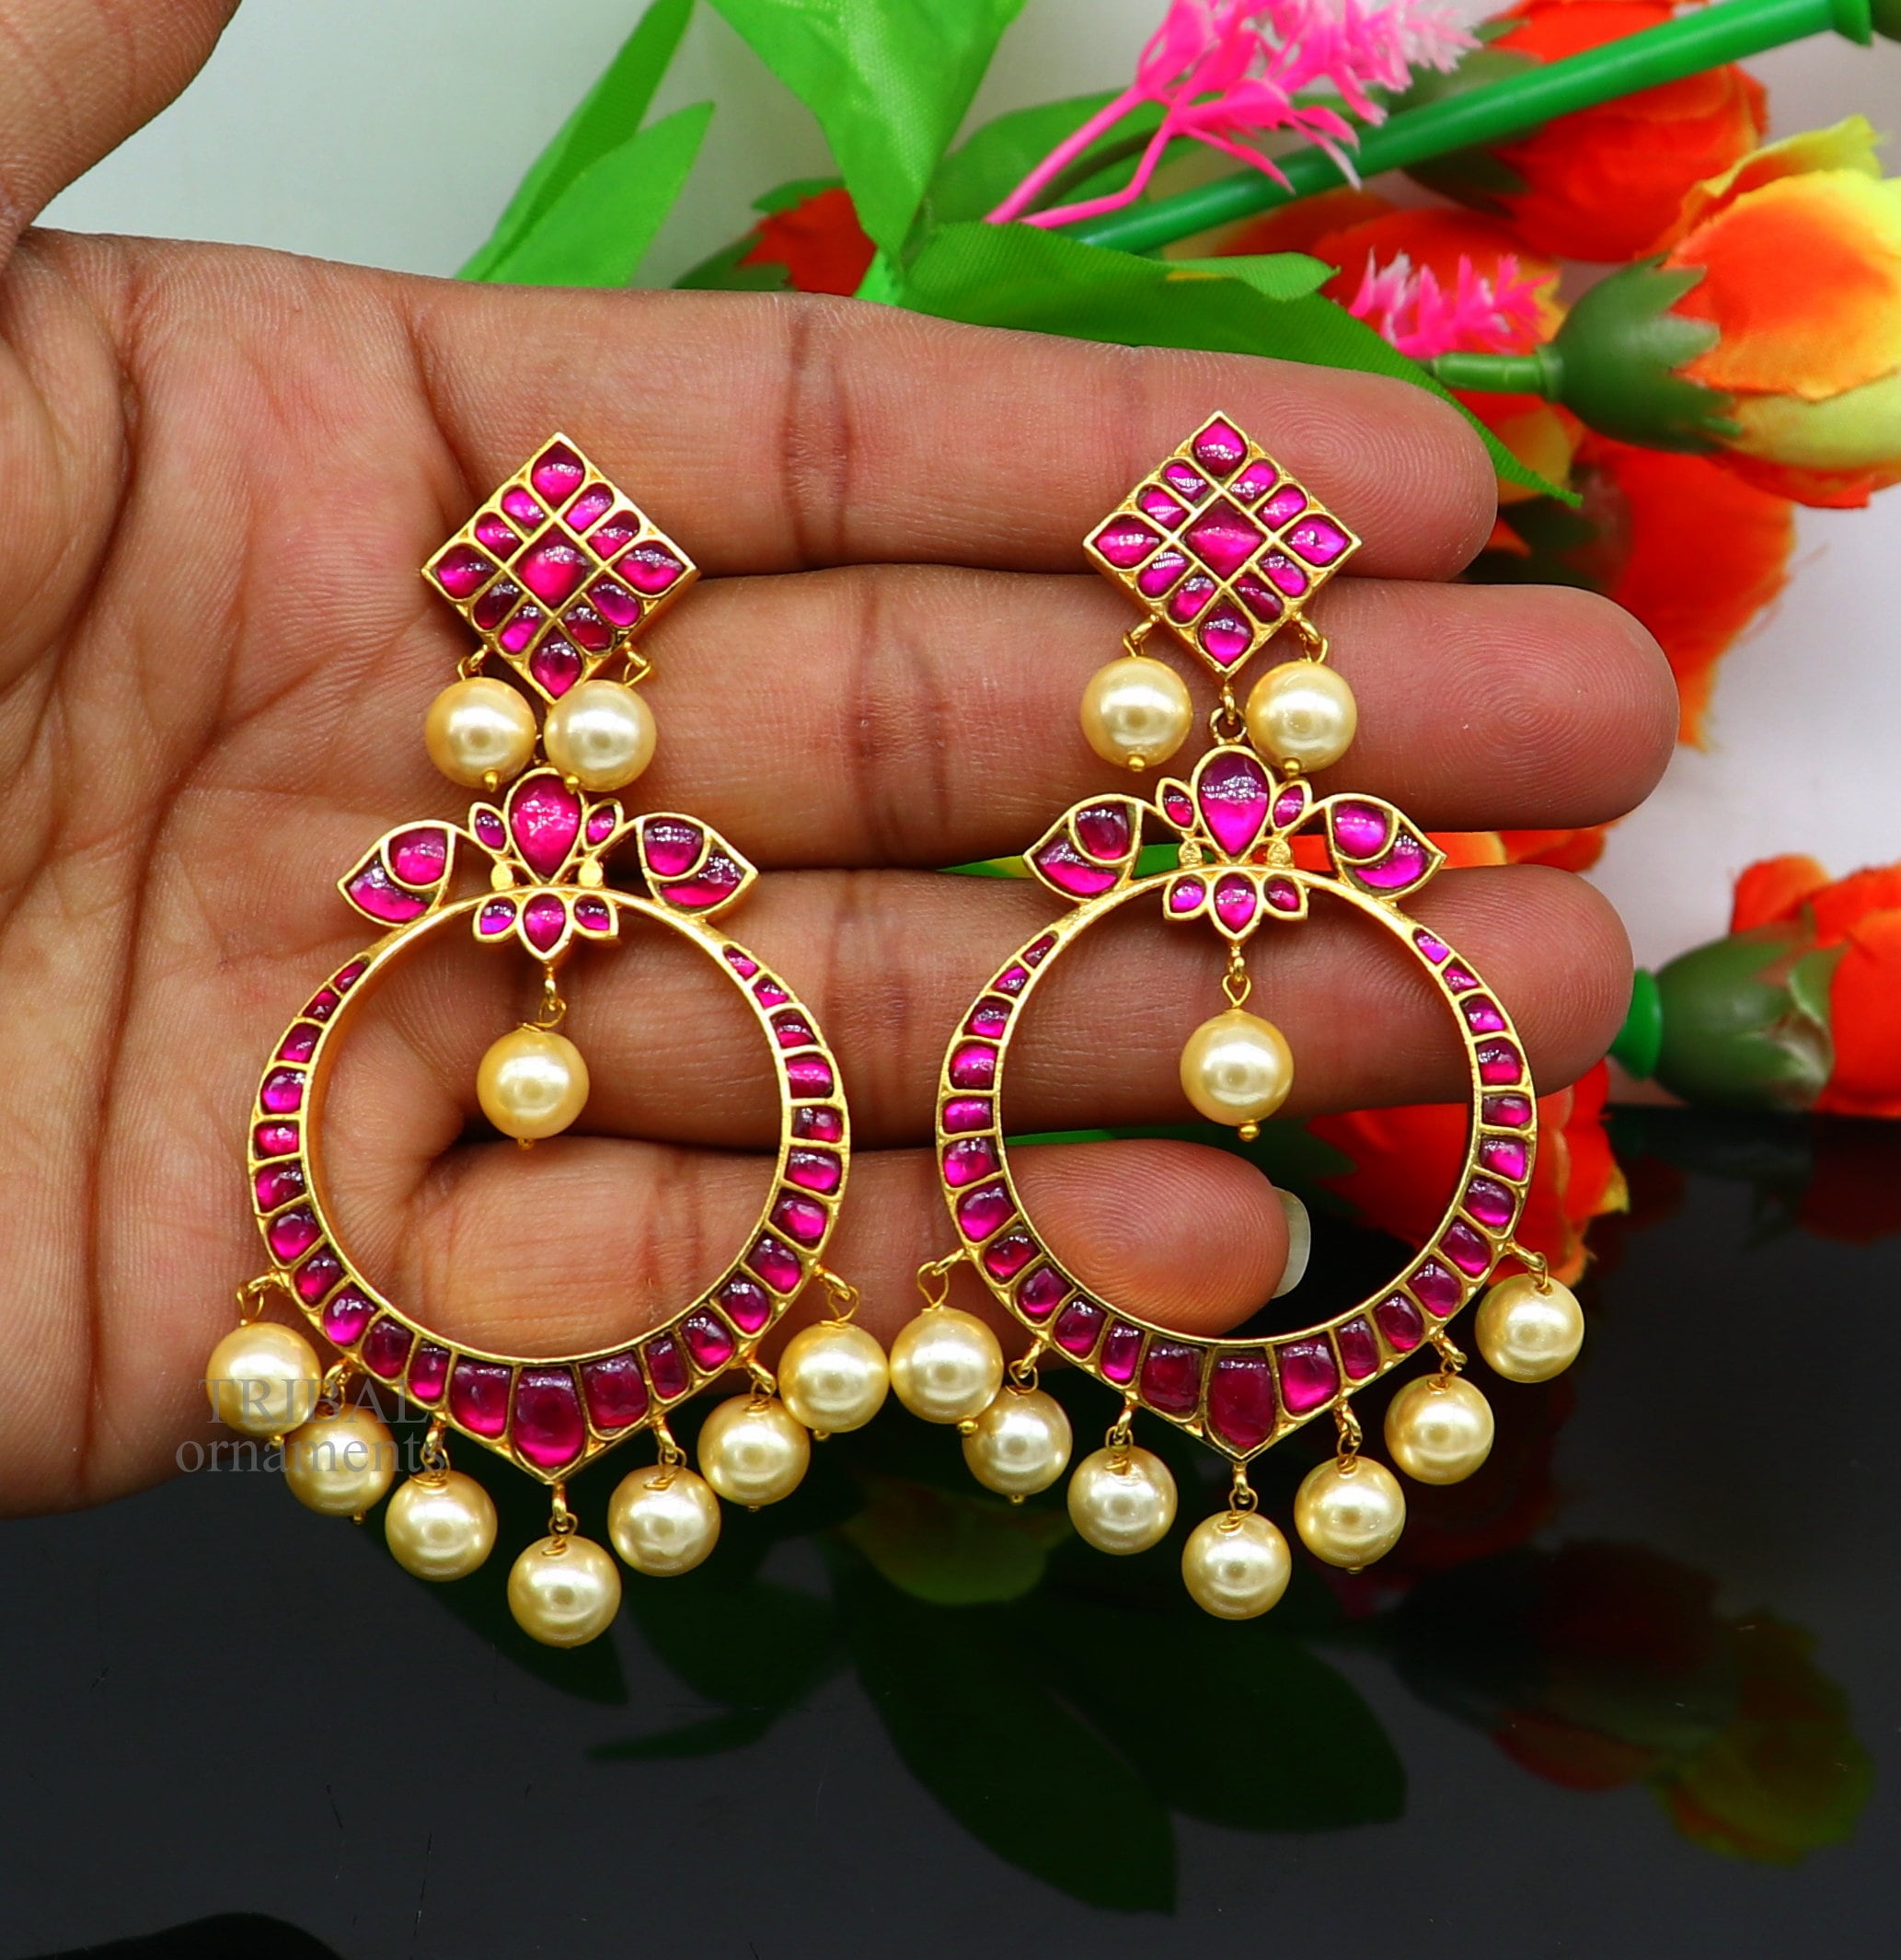 925 sterling silver handmade stylish chandbali earring gold guildplated  stud earrings gorgeous handing pearl best gifting jewelry s1013  TRIBAL  ORNAMENTS